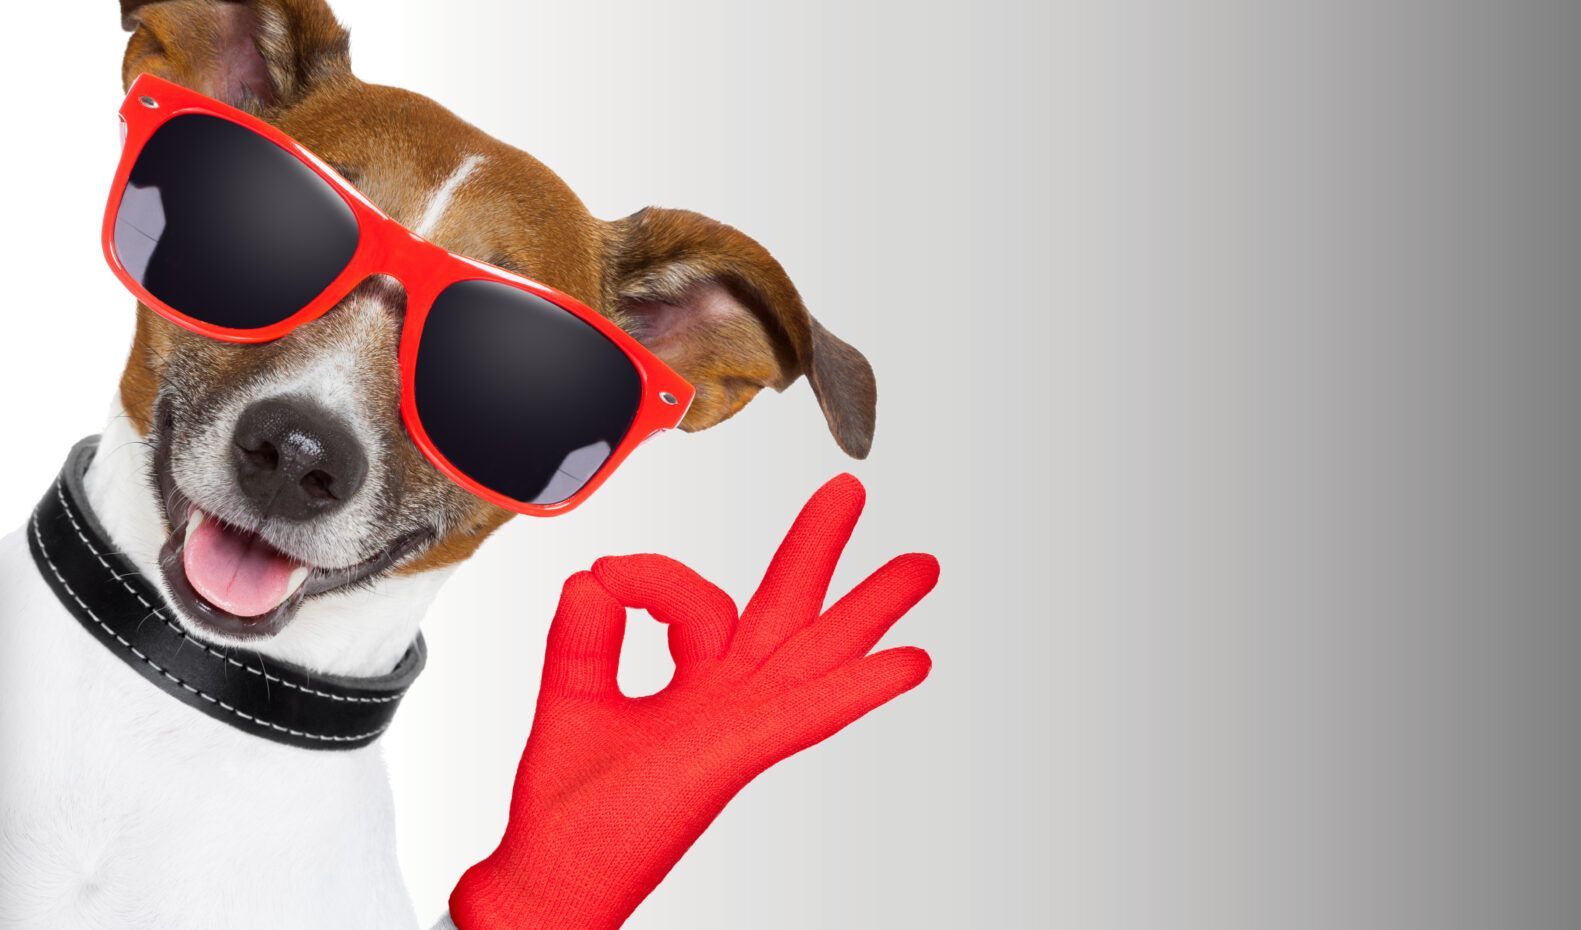 A dog wearing sunglasses and a red glove giving an ok sign